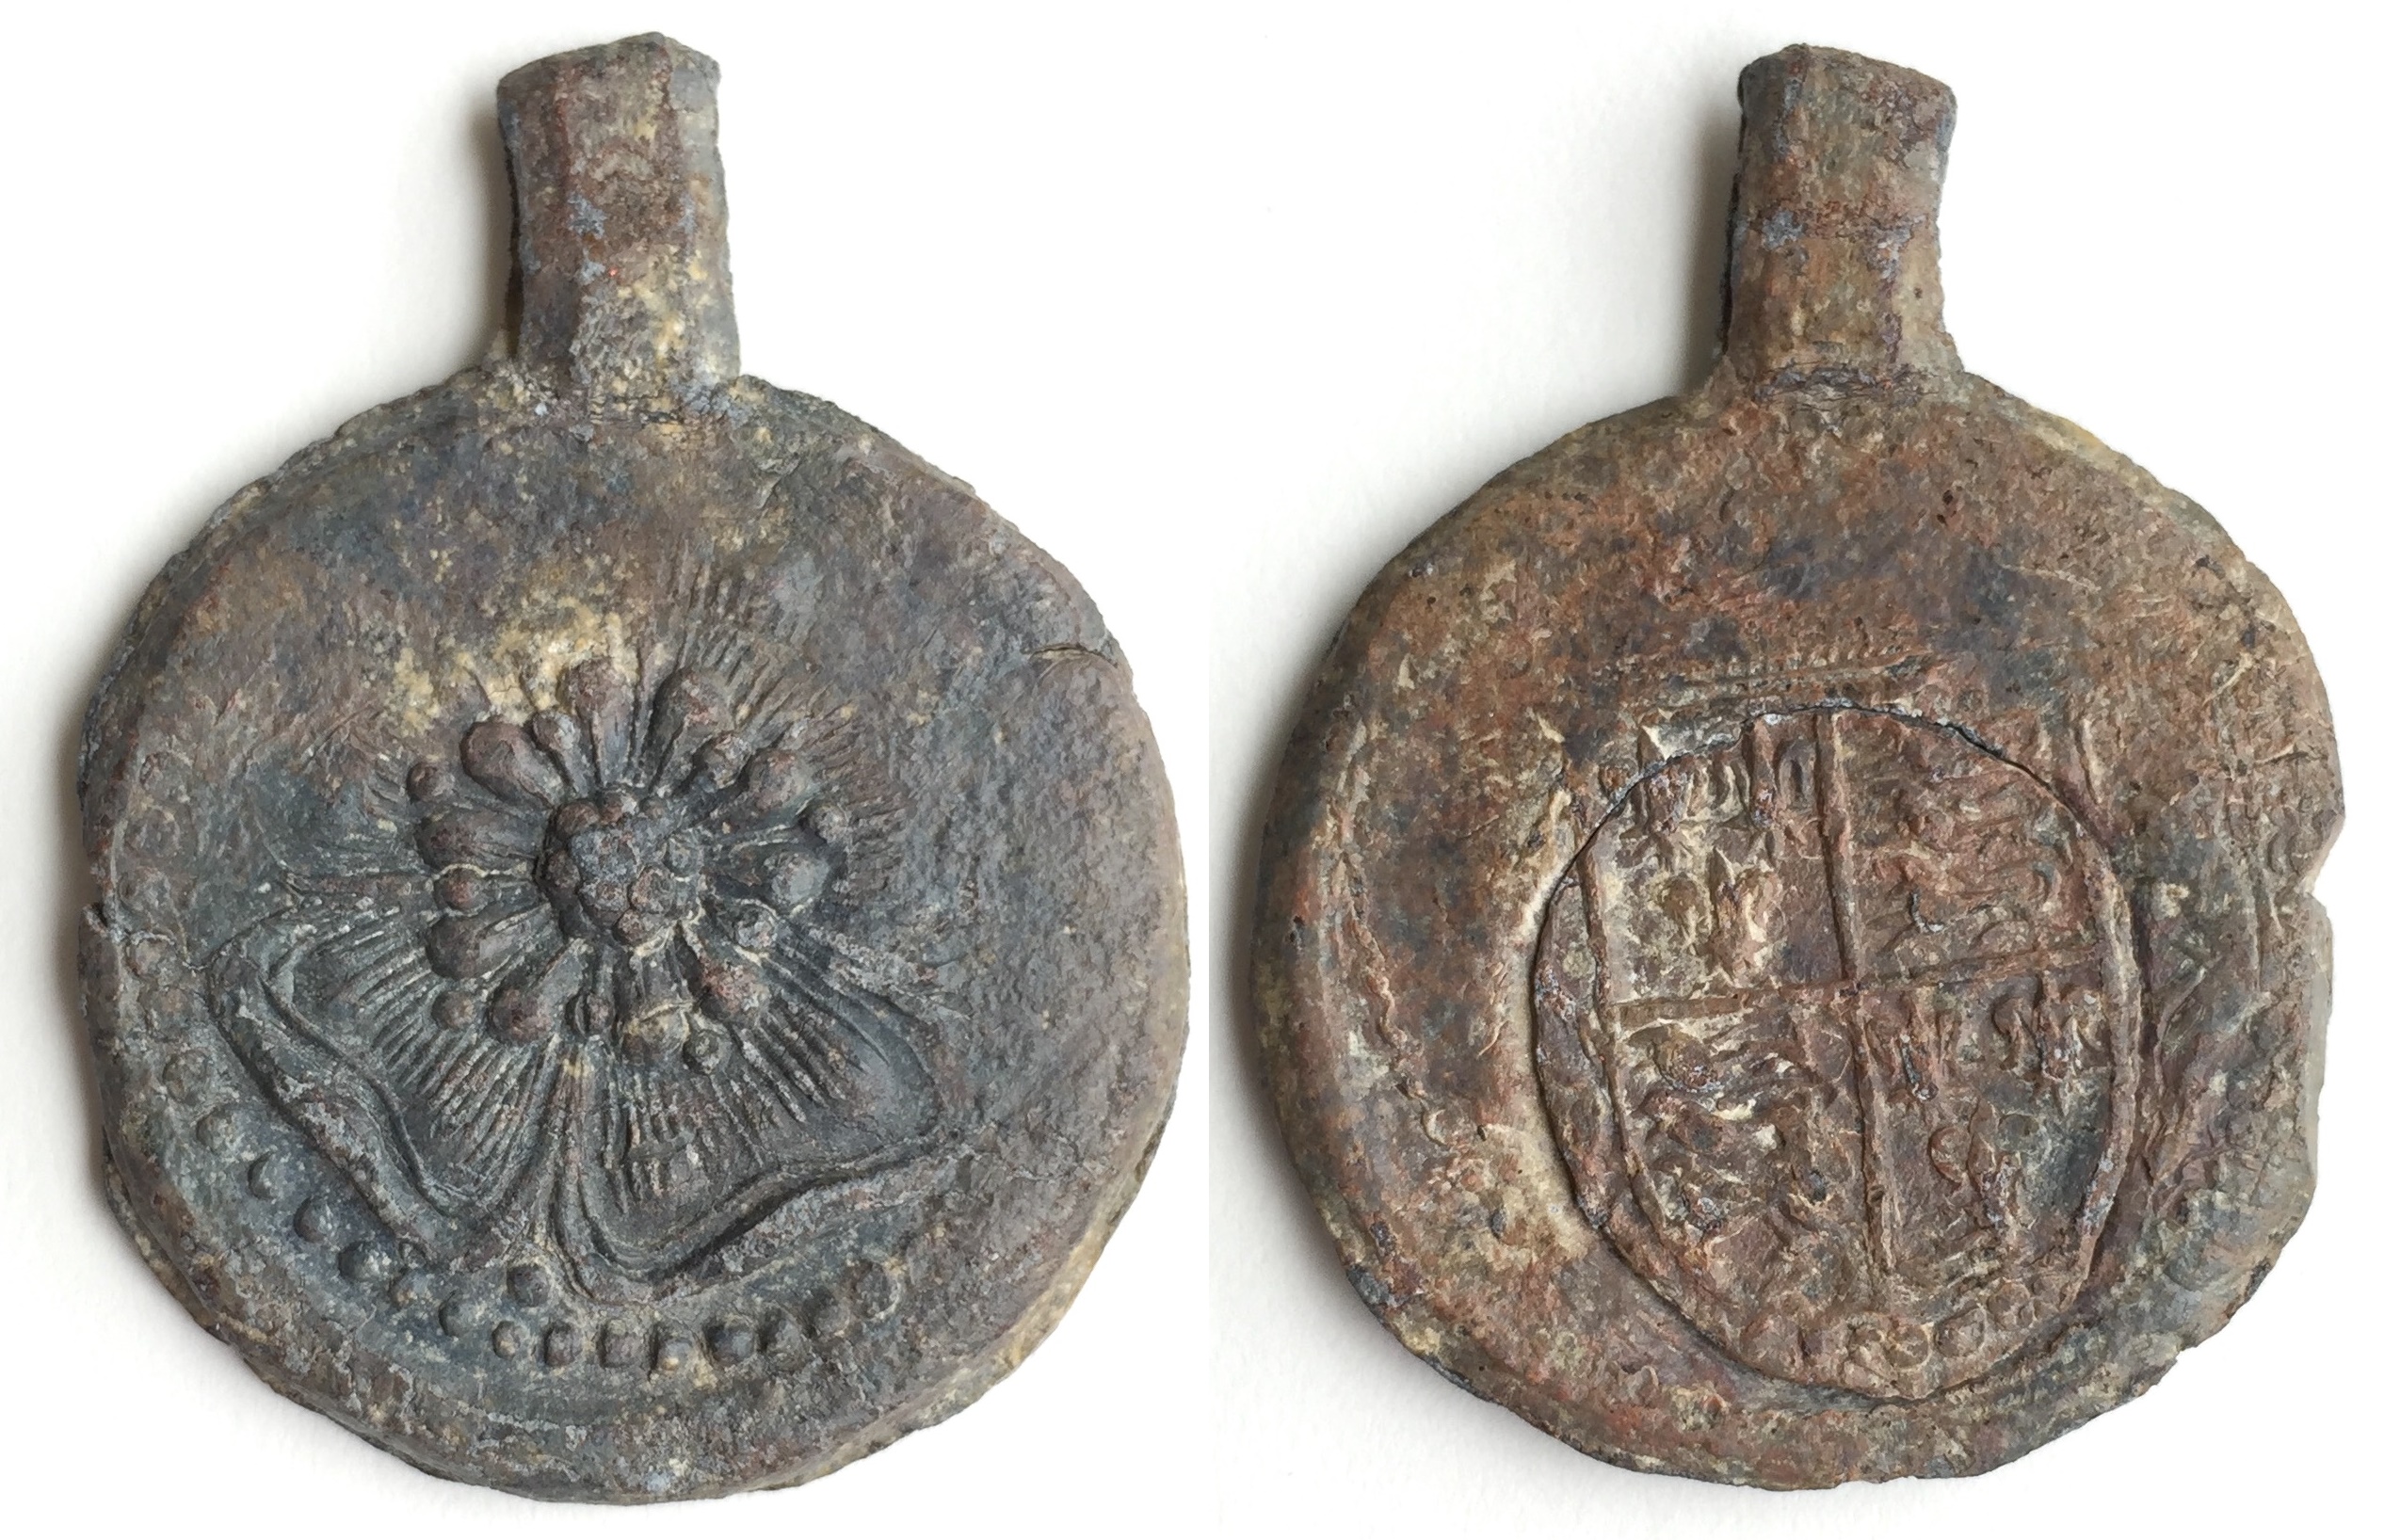 Cloth Seal, Coat of Arms of England 1406 to 1603 (with three breaks), Rose Seeded, Alnage